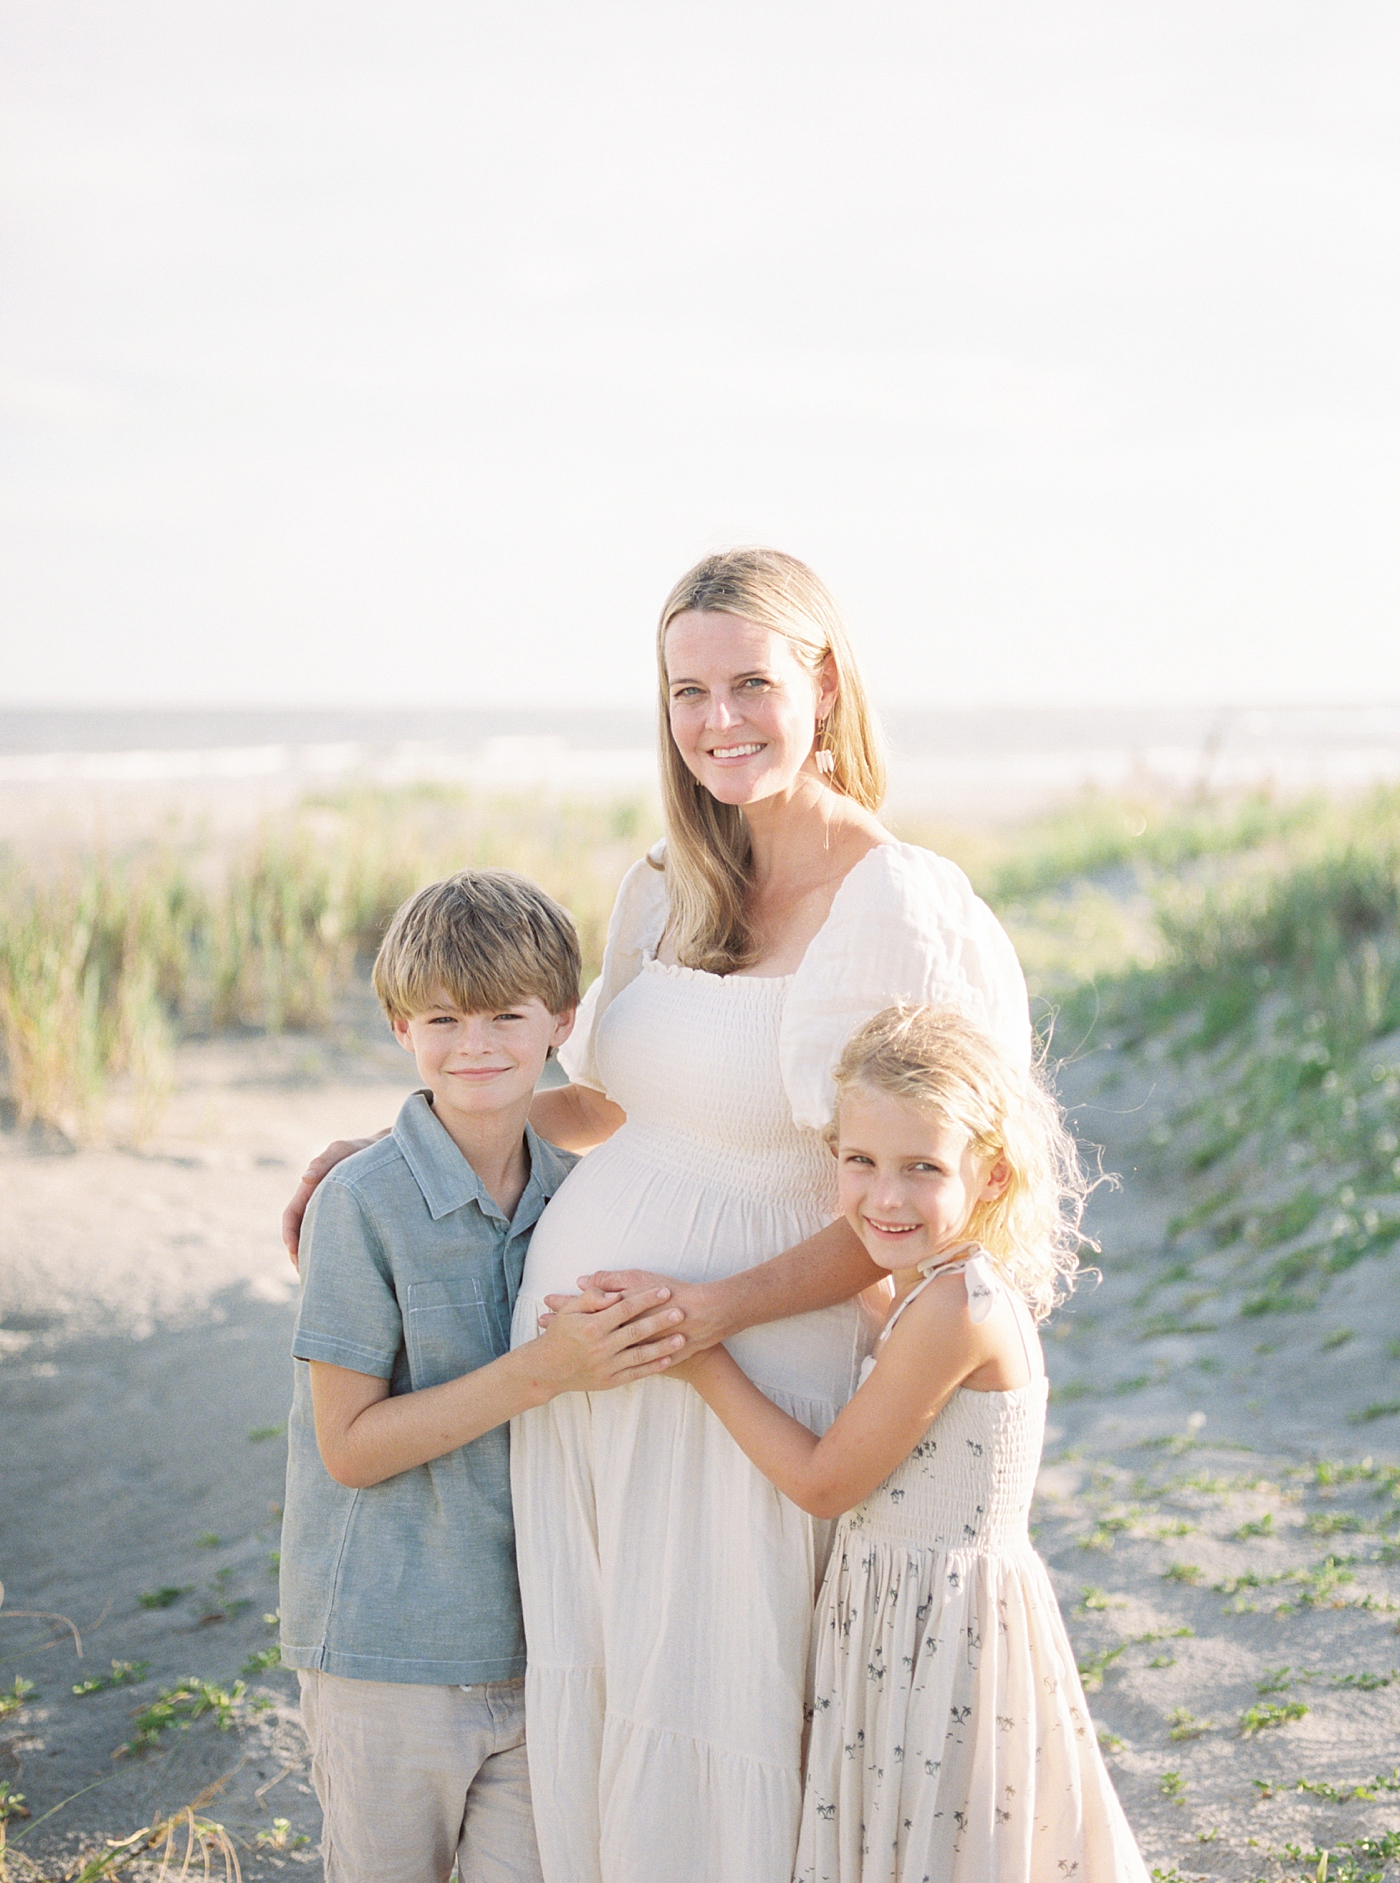 Mom to be with her two kids smiling during their Maternity Session at Folly Beach | Image by Caitlyn Motycka